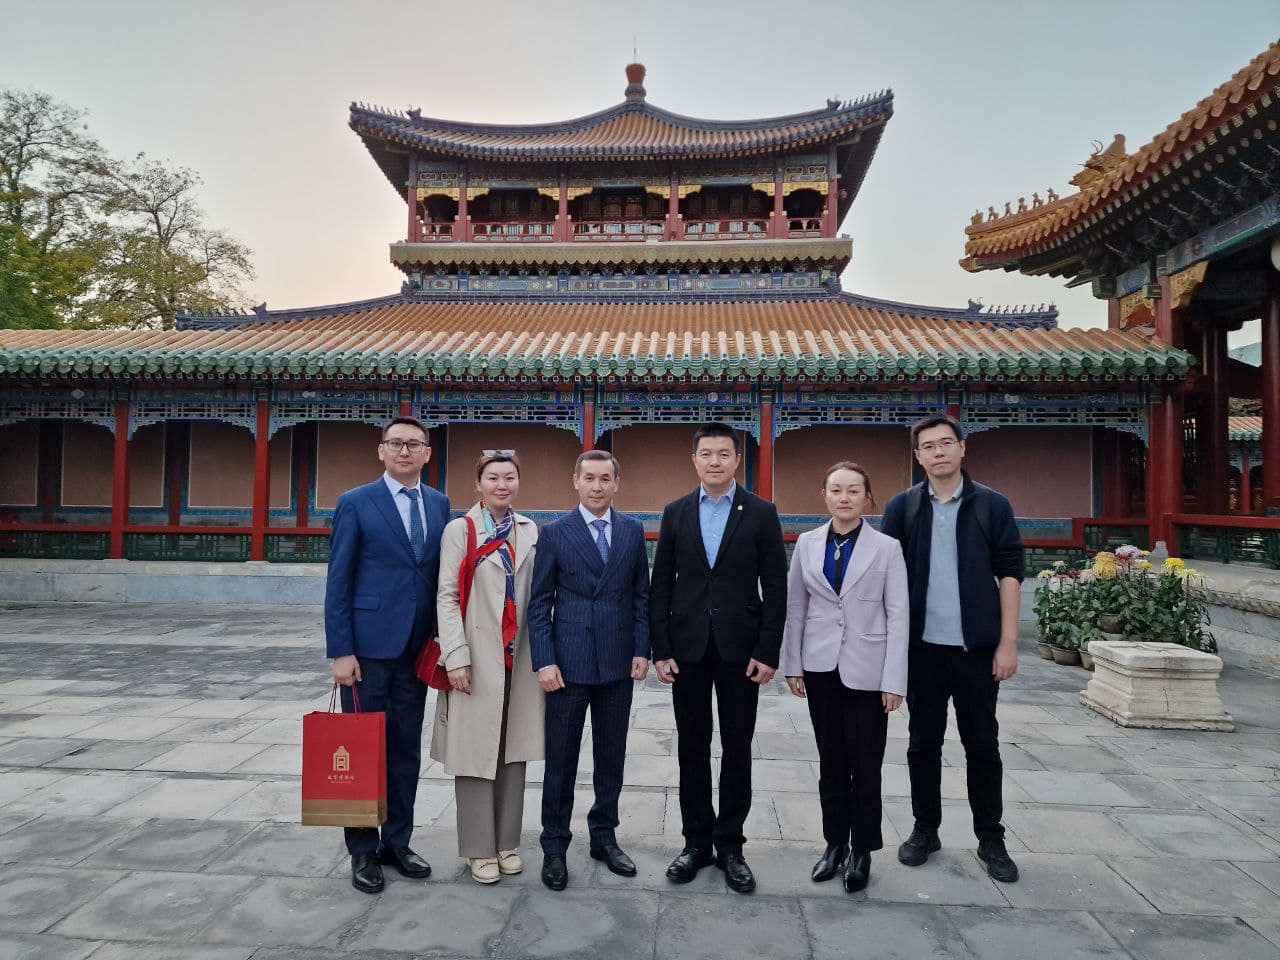 The meeting of Acting Director of the National Museum with the Acting Director of the Palace Museum